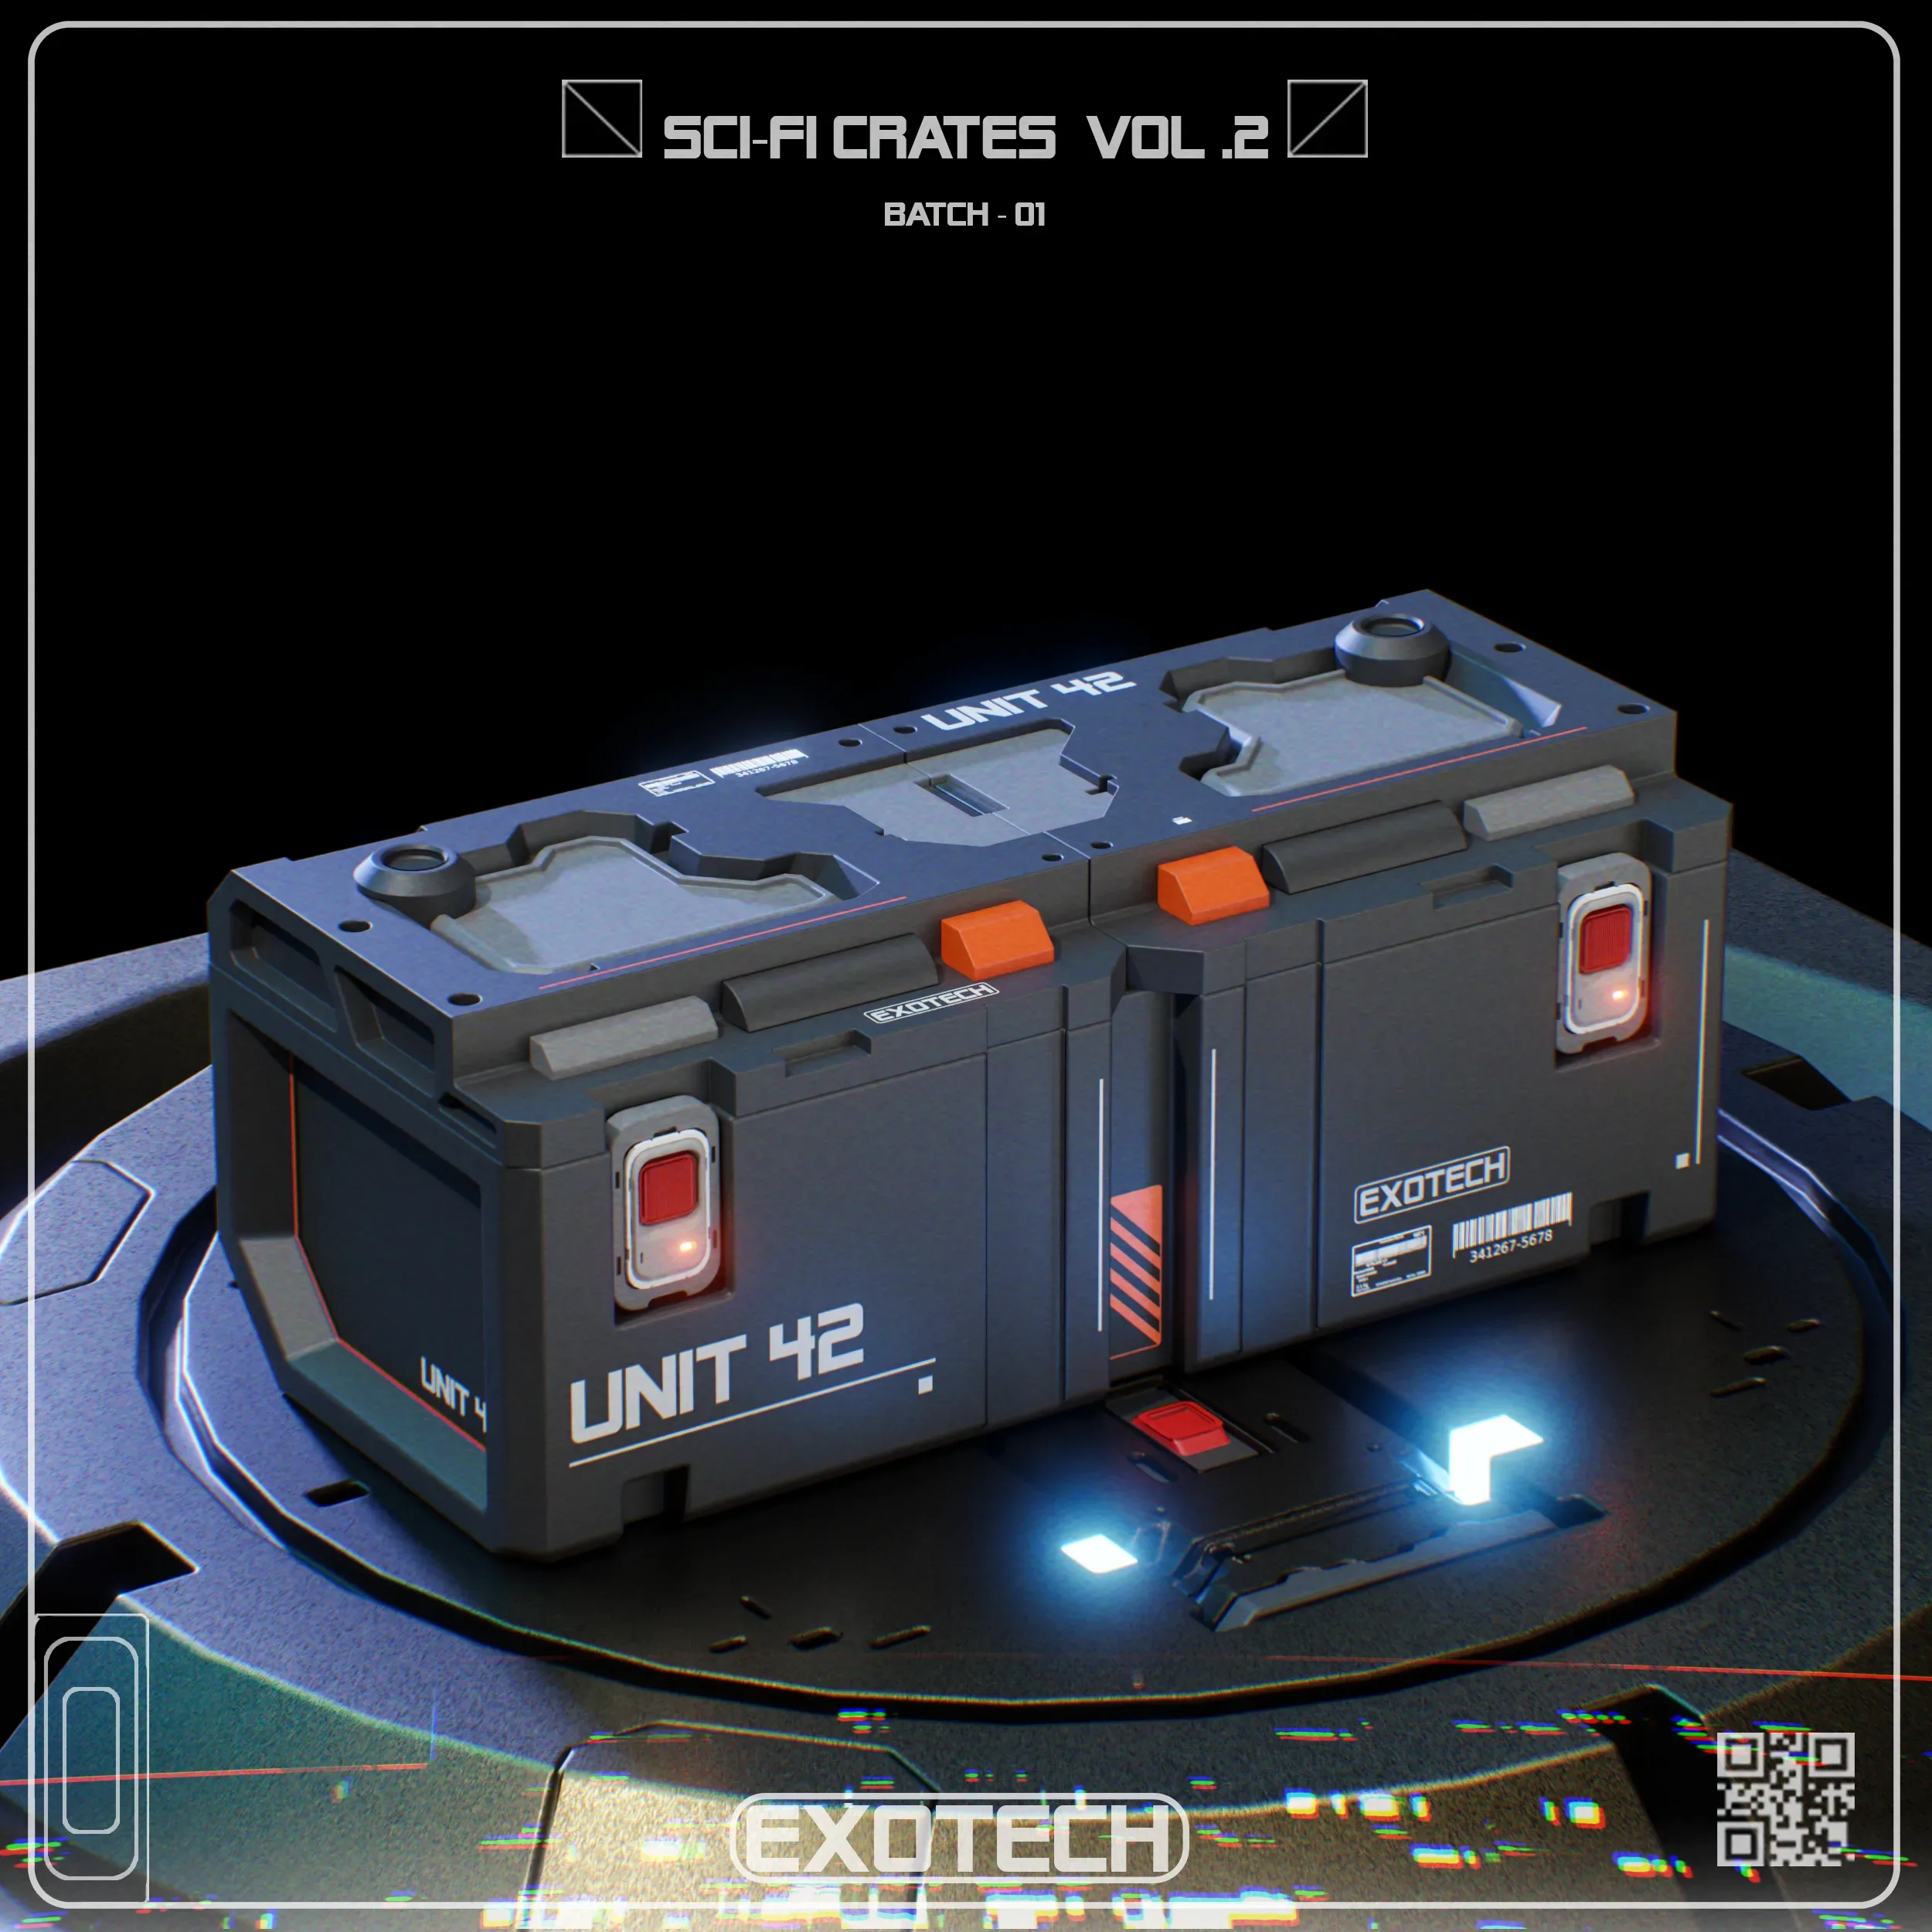 Sci-fi boxes and crates vol. 2 - batch 01